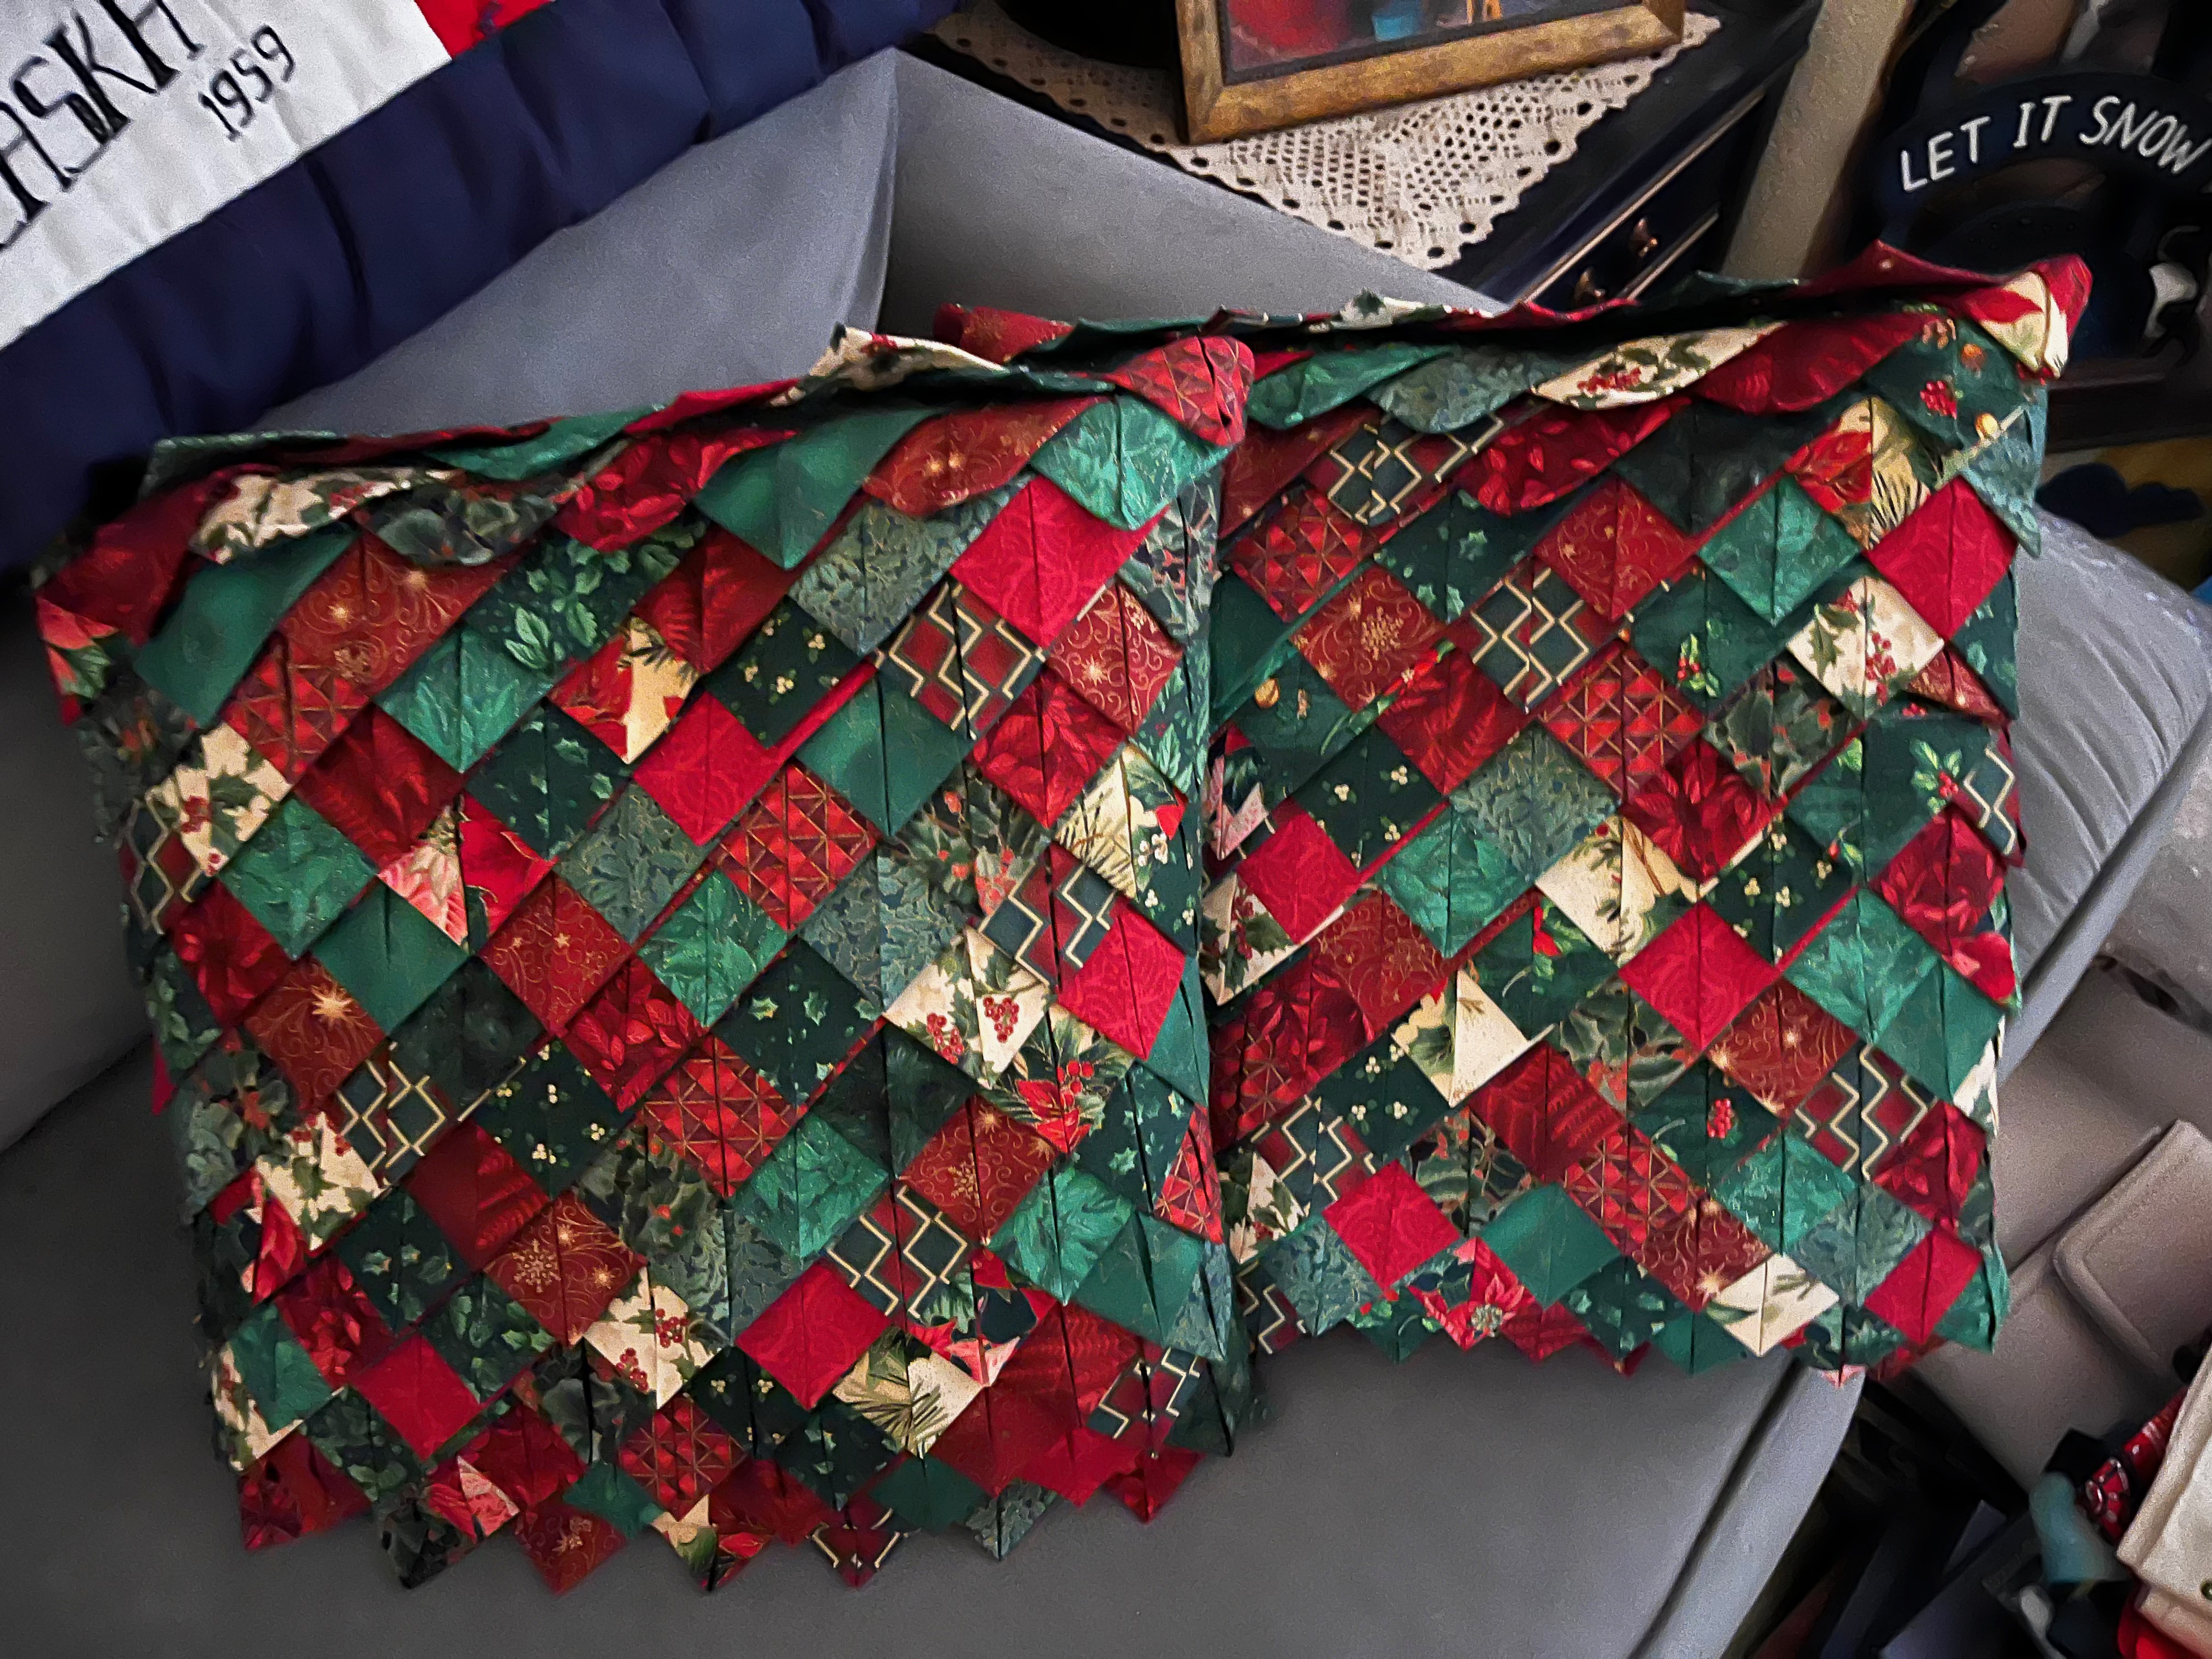 1988 Machine-Stitched Square Quilted Holiday Christmas Pillows, Set of 2 (15\